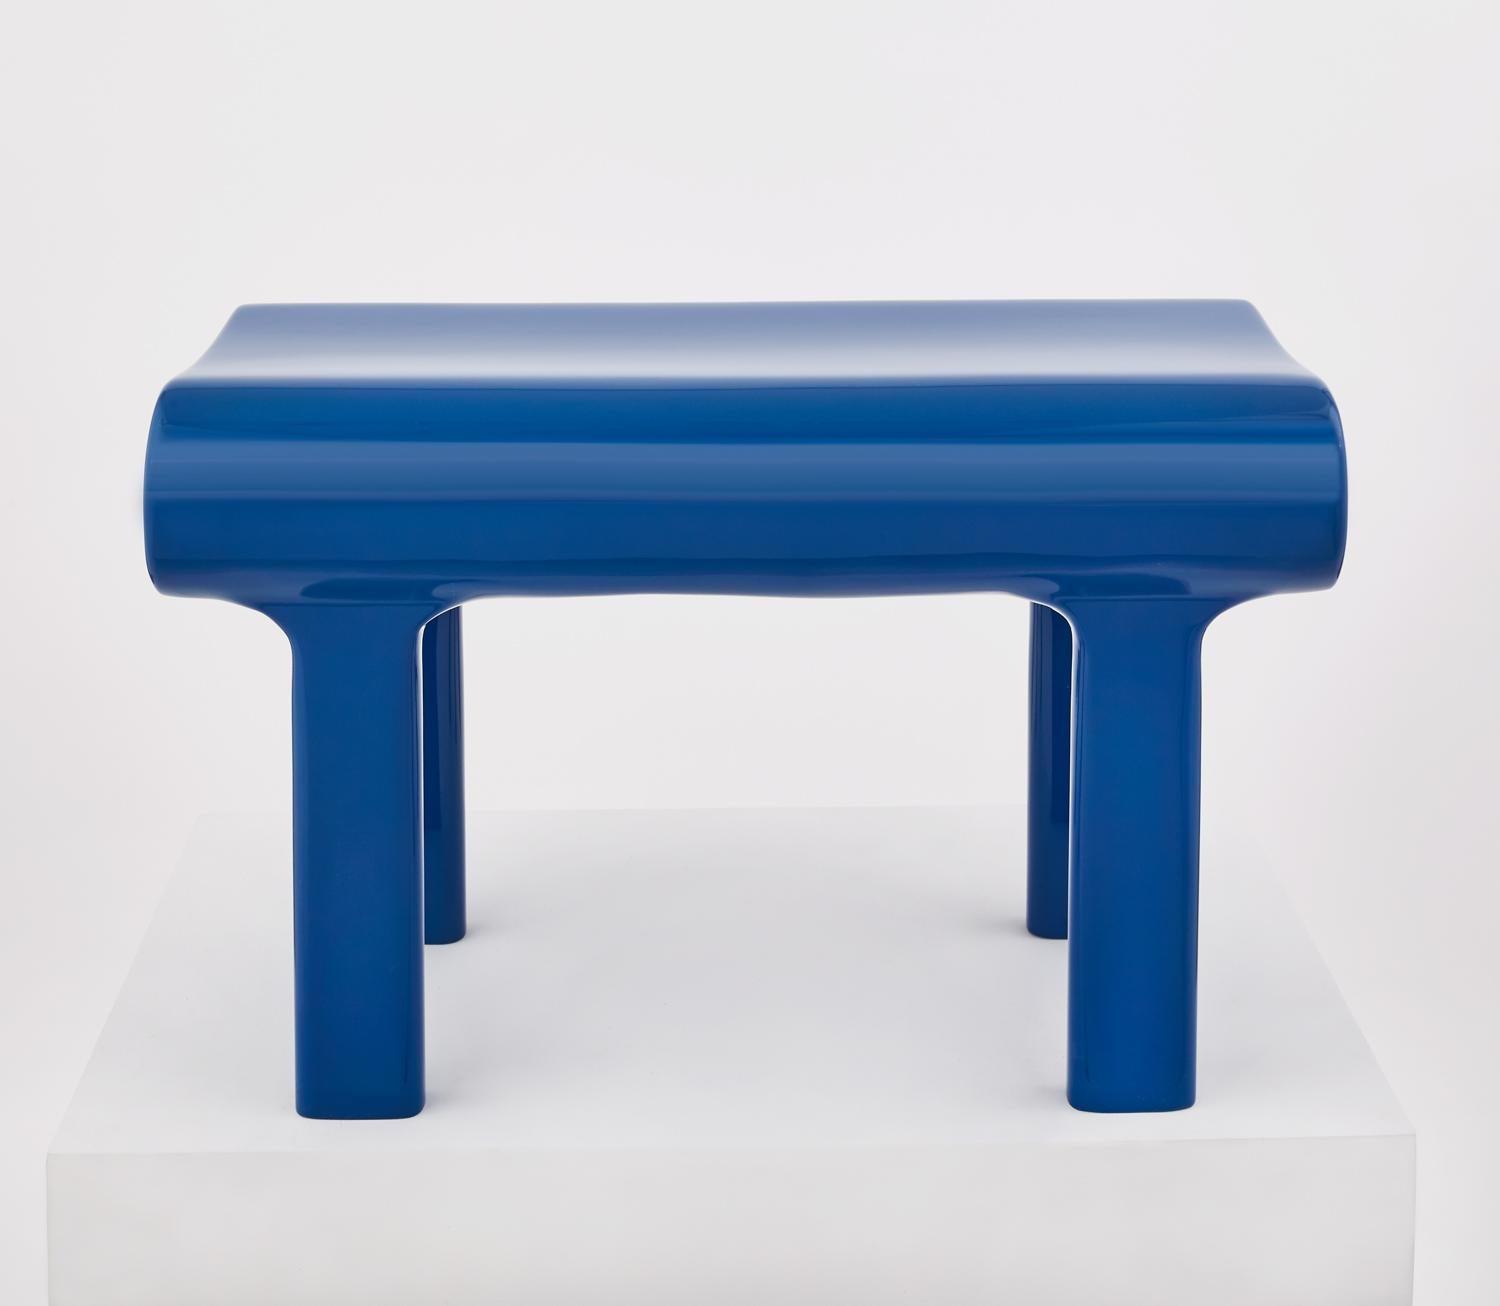 Contemporary sculpted blue wood bench with acrylic finish. Each bench is constructed from solid beech and coated with a gloss acrylic finish. Designed by Zelonky Studios, An instant Minimalist icon, joining the pantheon of iconic Minimalist artists,